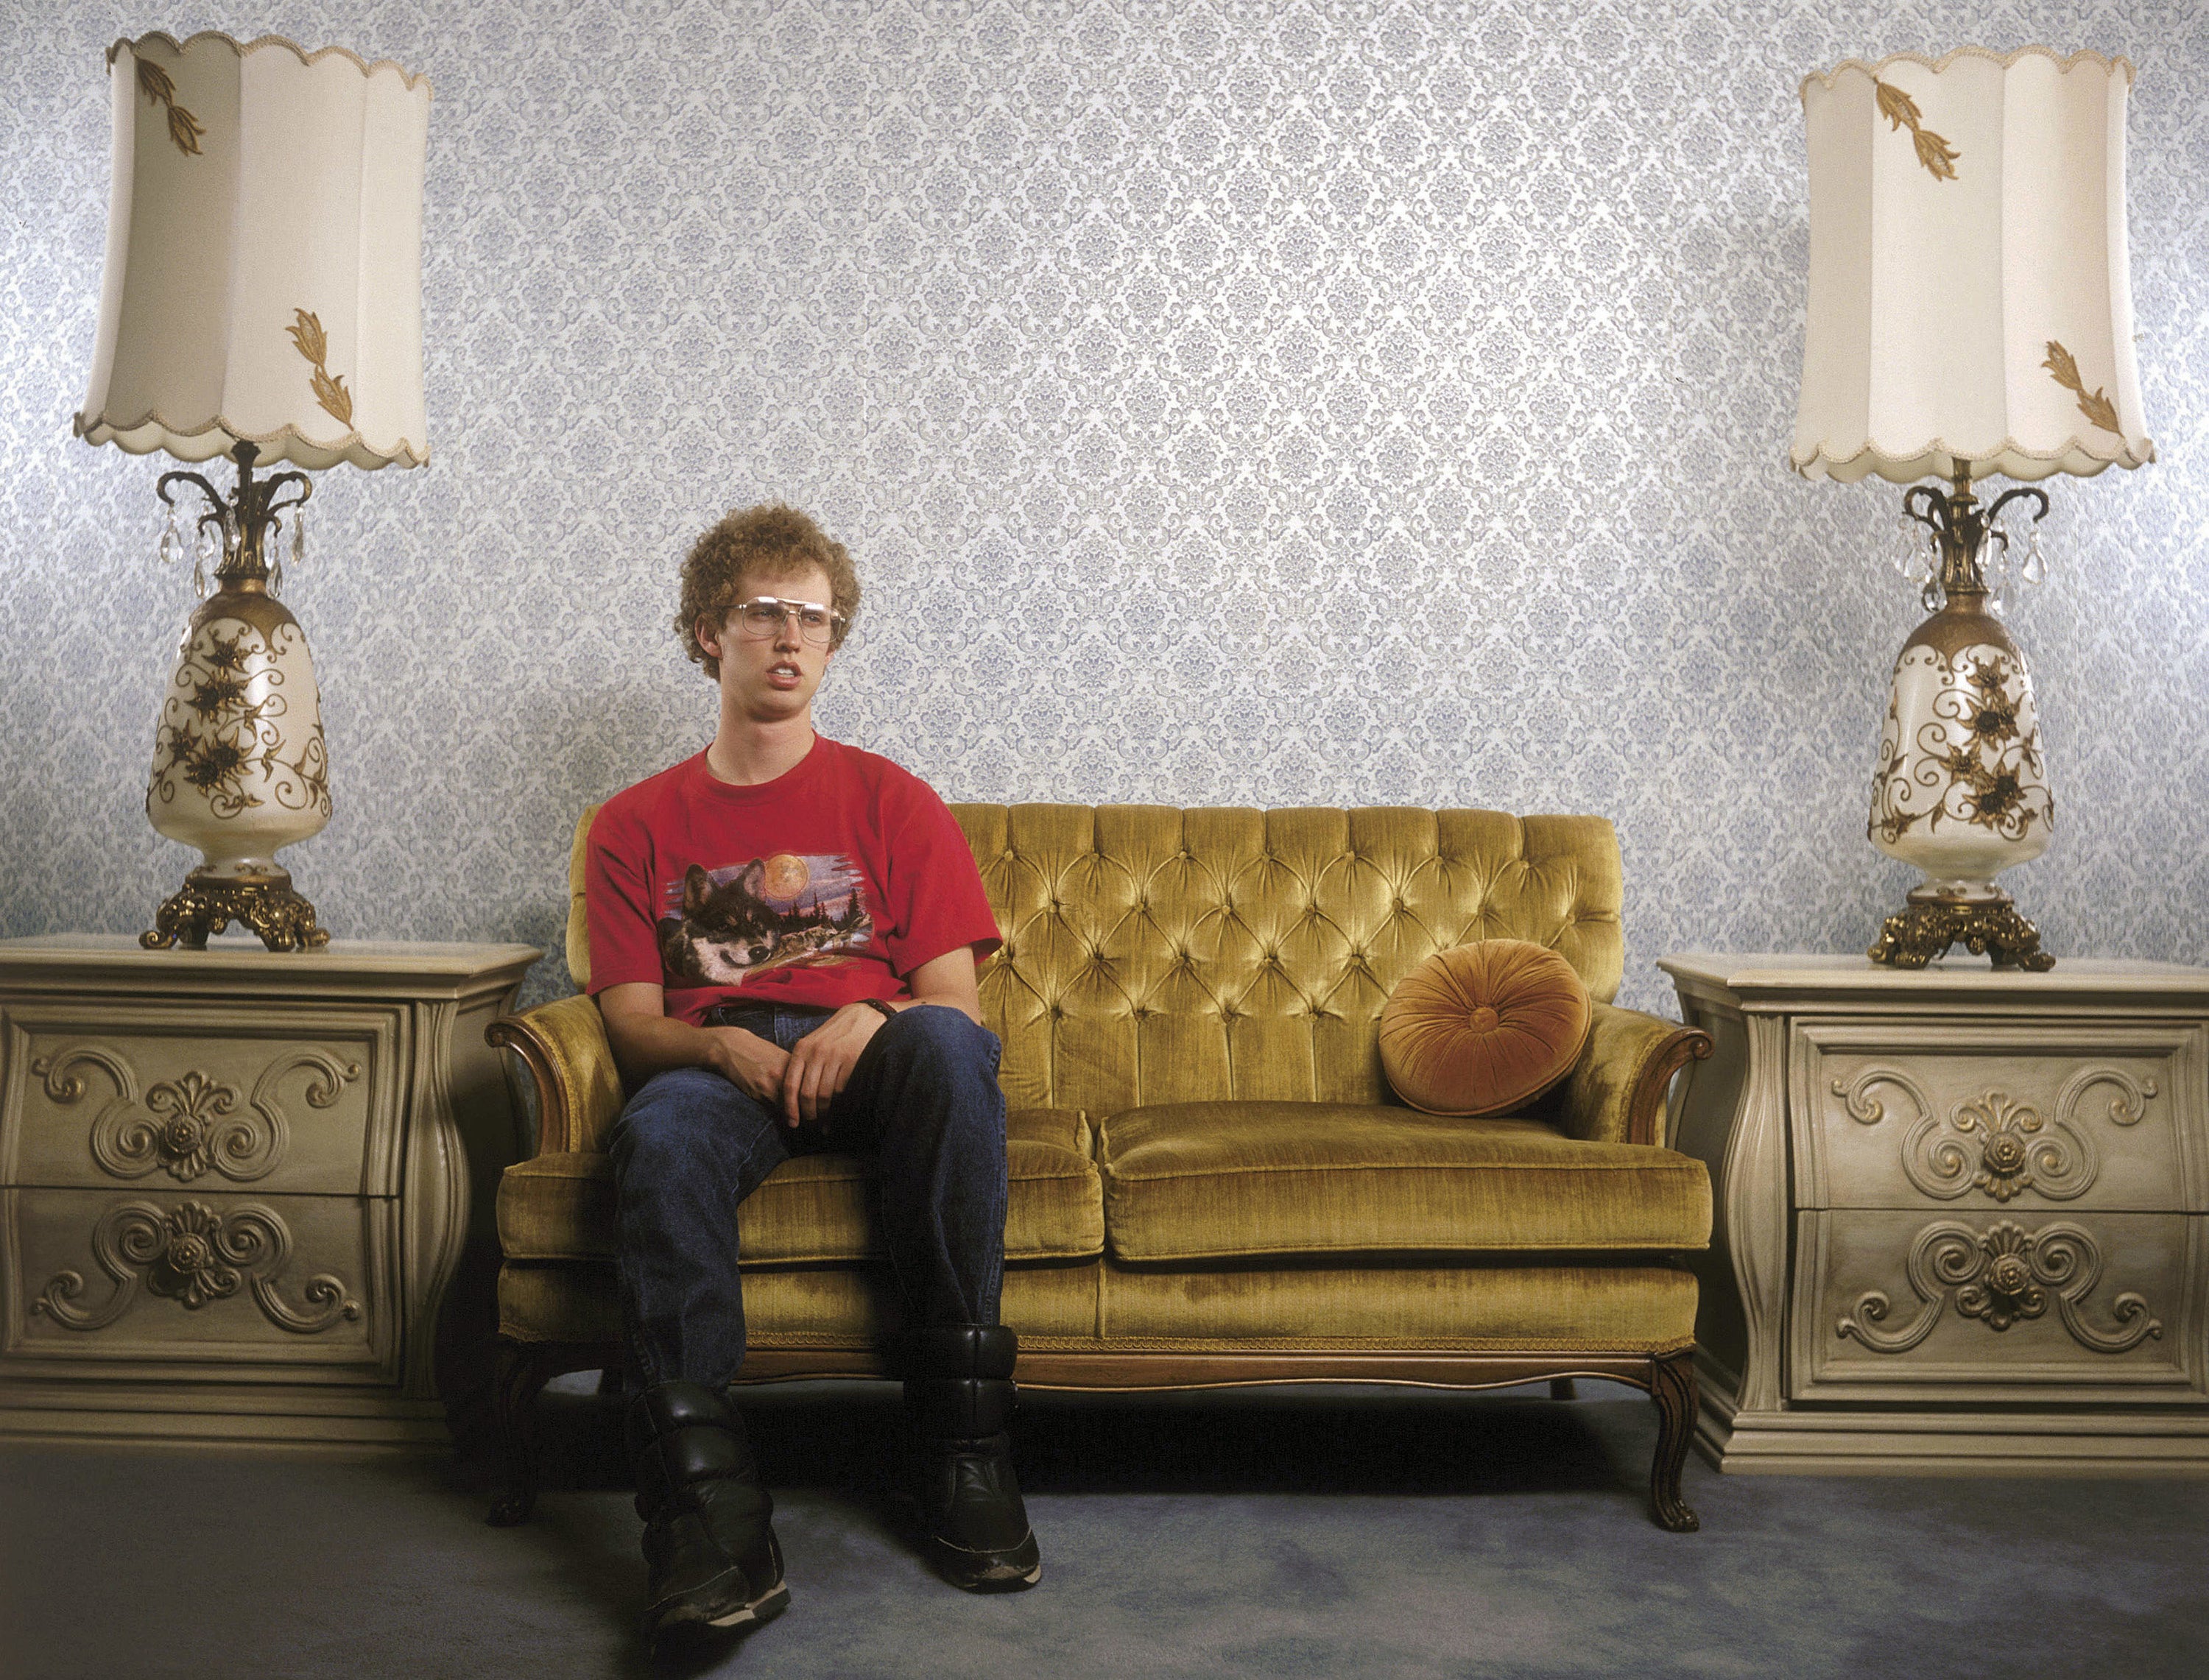 Napoleon Dynamite sitting on a couch